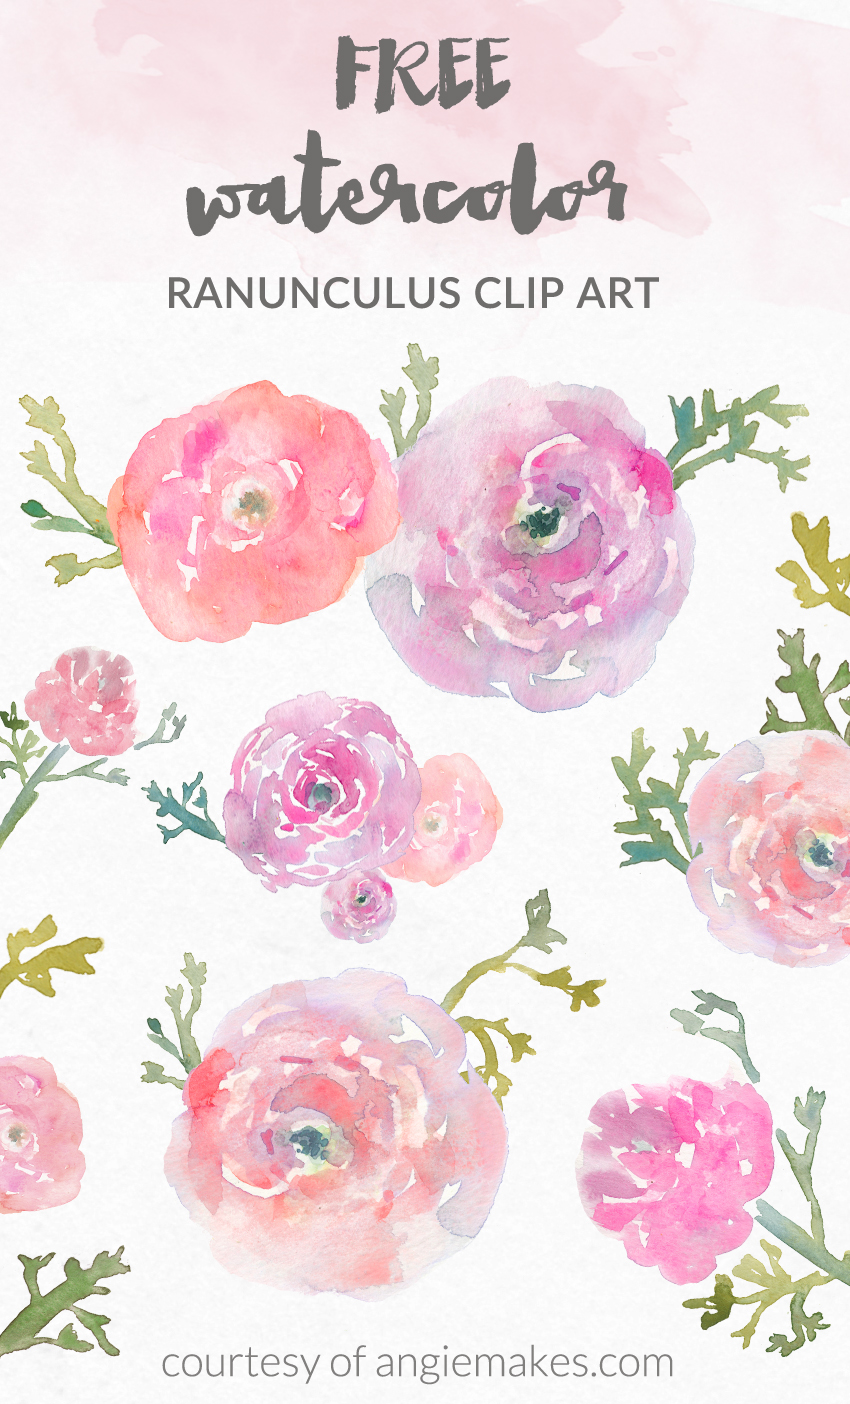 Free Girly Graphics and Watercolor Clip Art